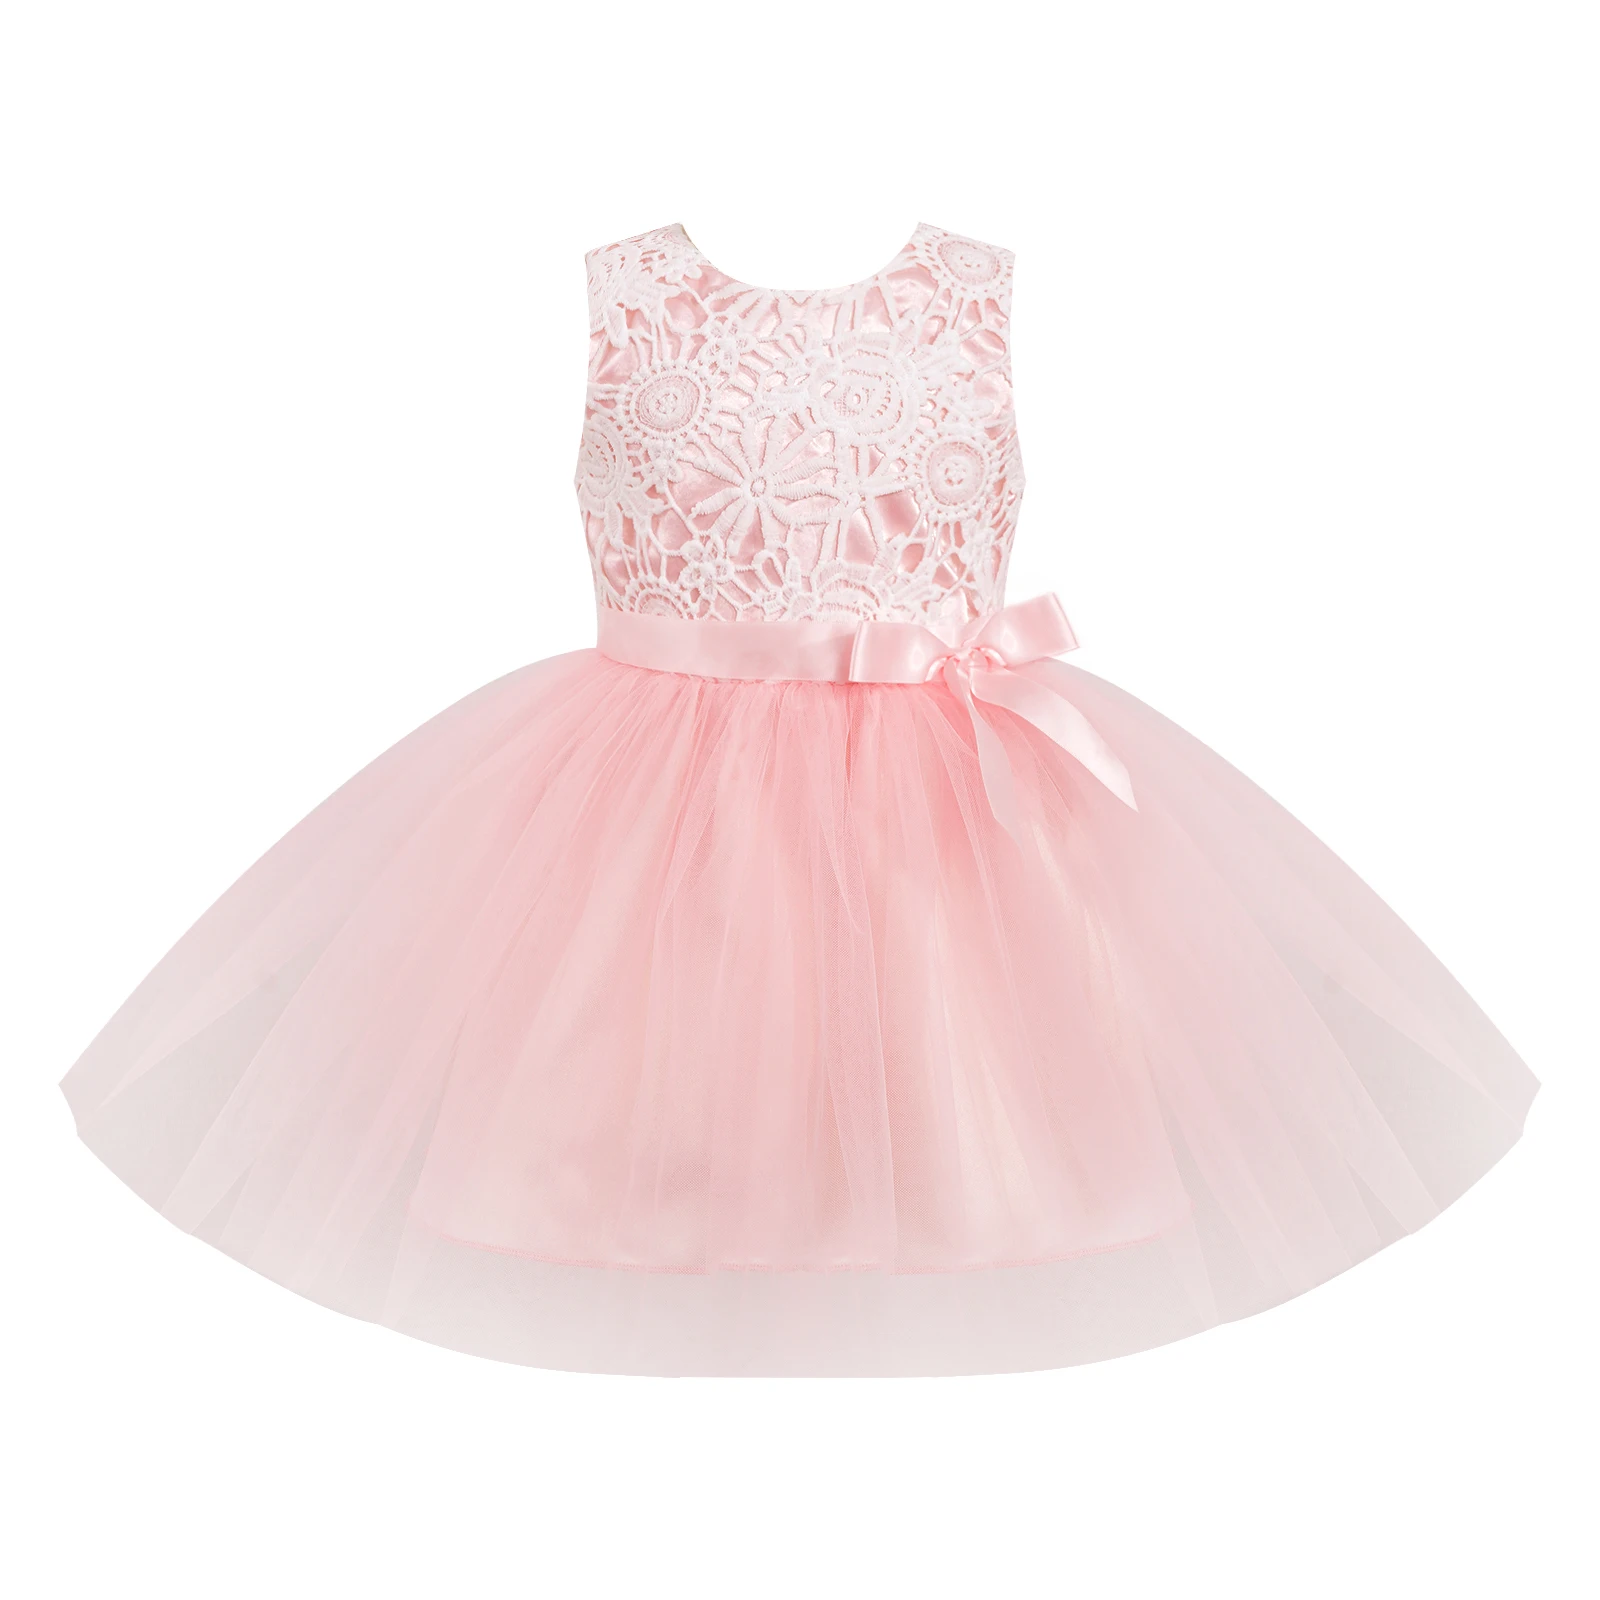 Baby Girls Cute Princess Dress Sleeveless Lace Tulle Party Ballet Dance Tutu Dress for Wedding Party Baby Shower Christening New